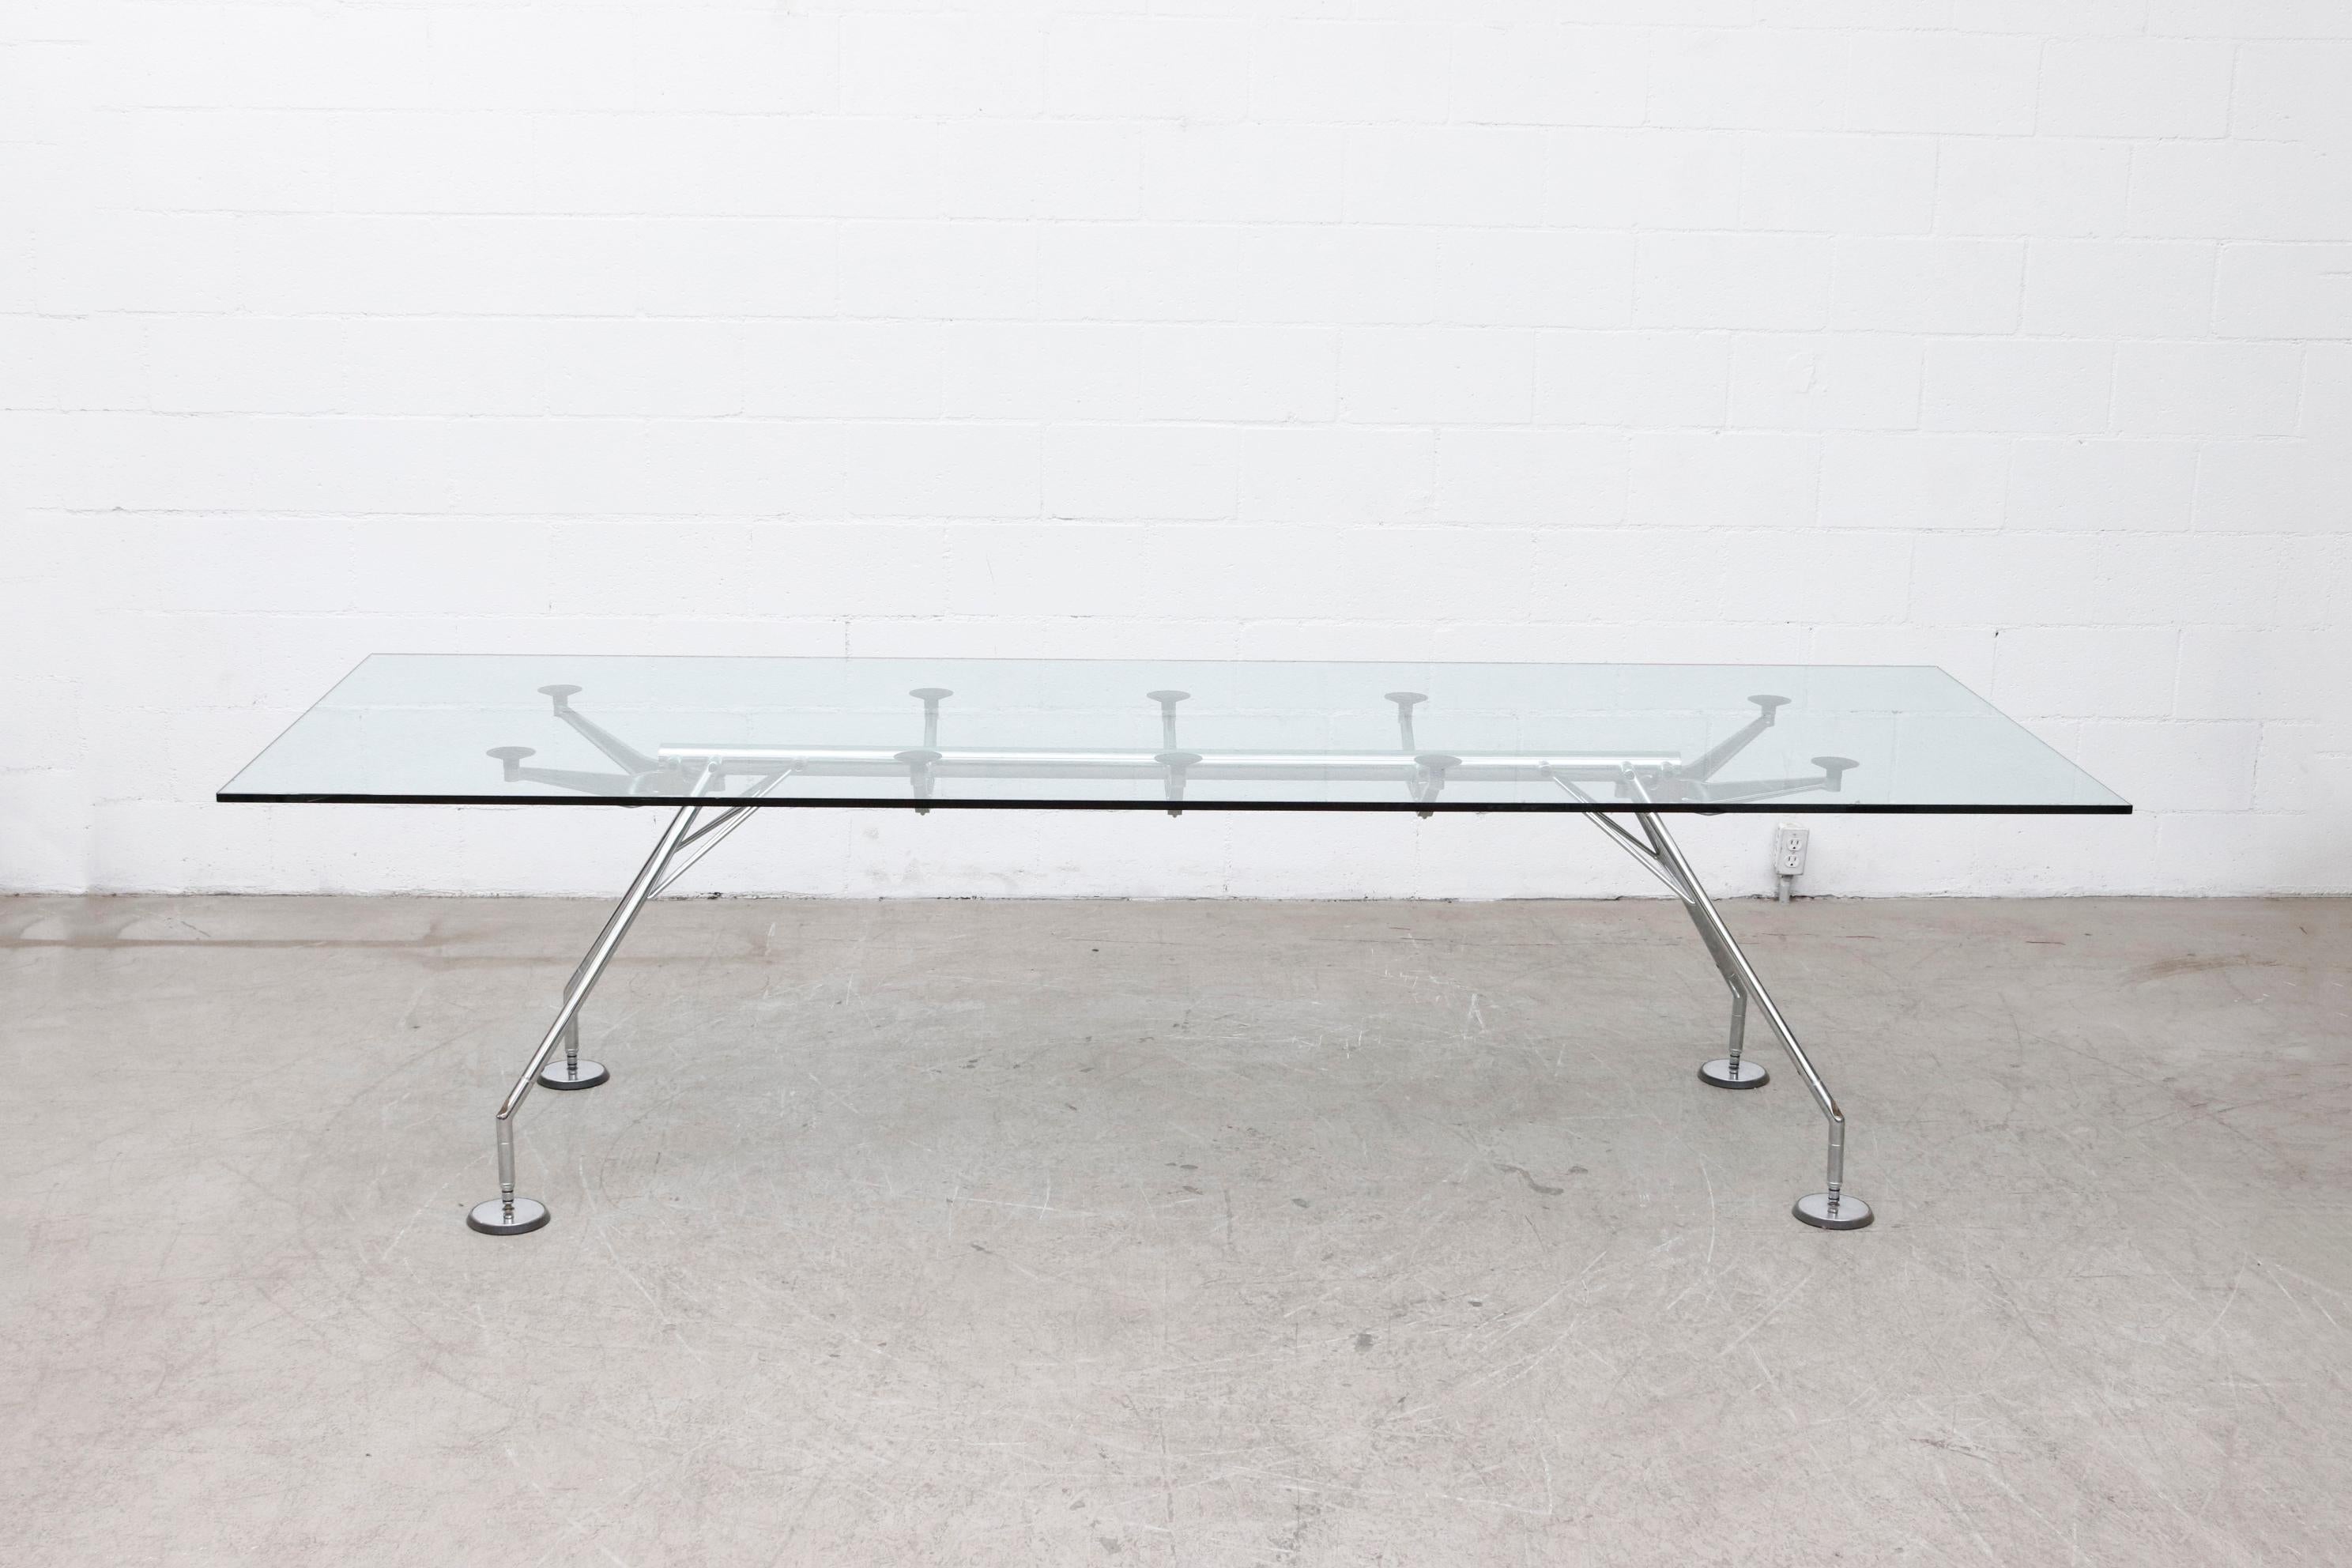 Norman foster for Tecno clear glass dining or conference table with chrome legs. Frame measures 83 x 26.5, glass is 1/2